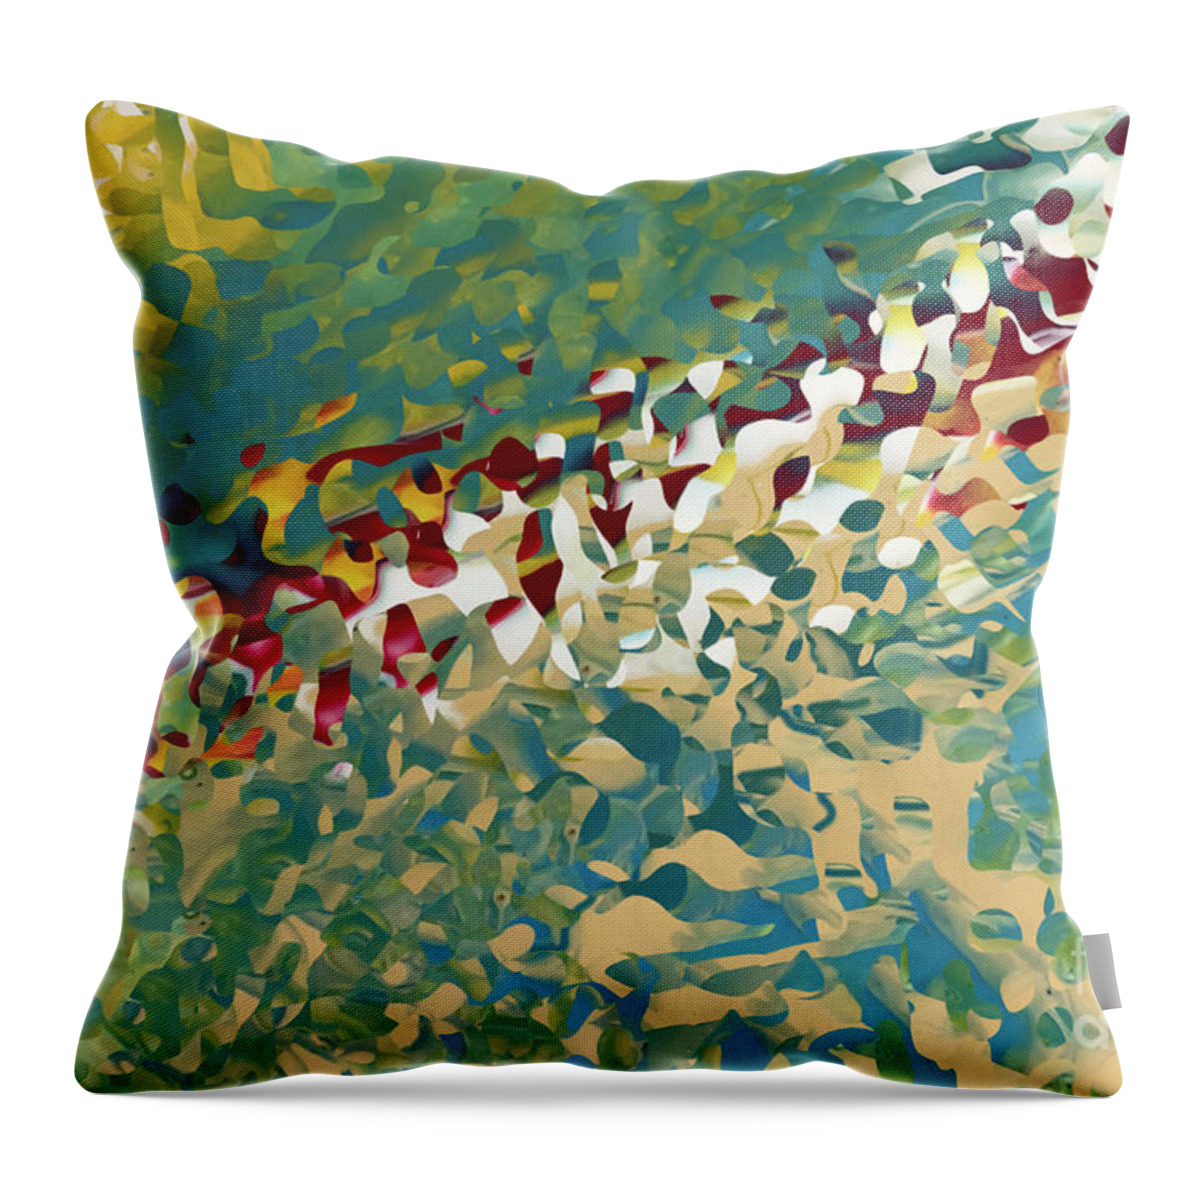 Red Throw Pillow featuring the painting Hebrews 12 11. The Trials of Discipline by Mark Lawrence